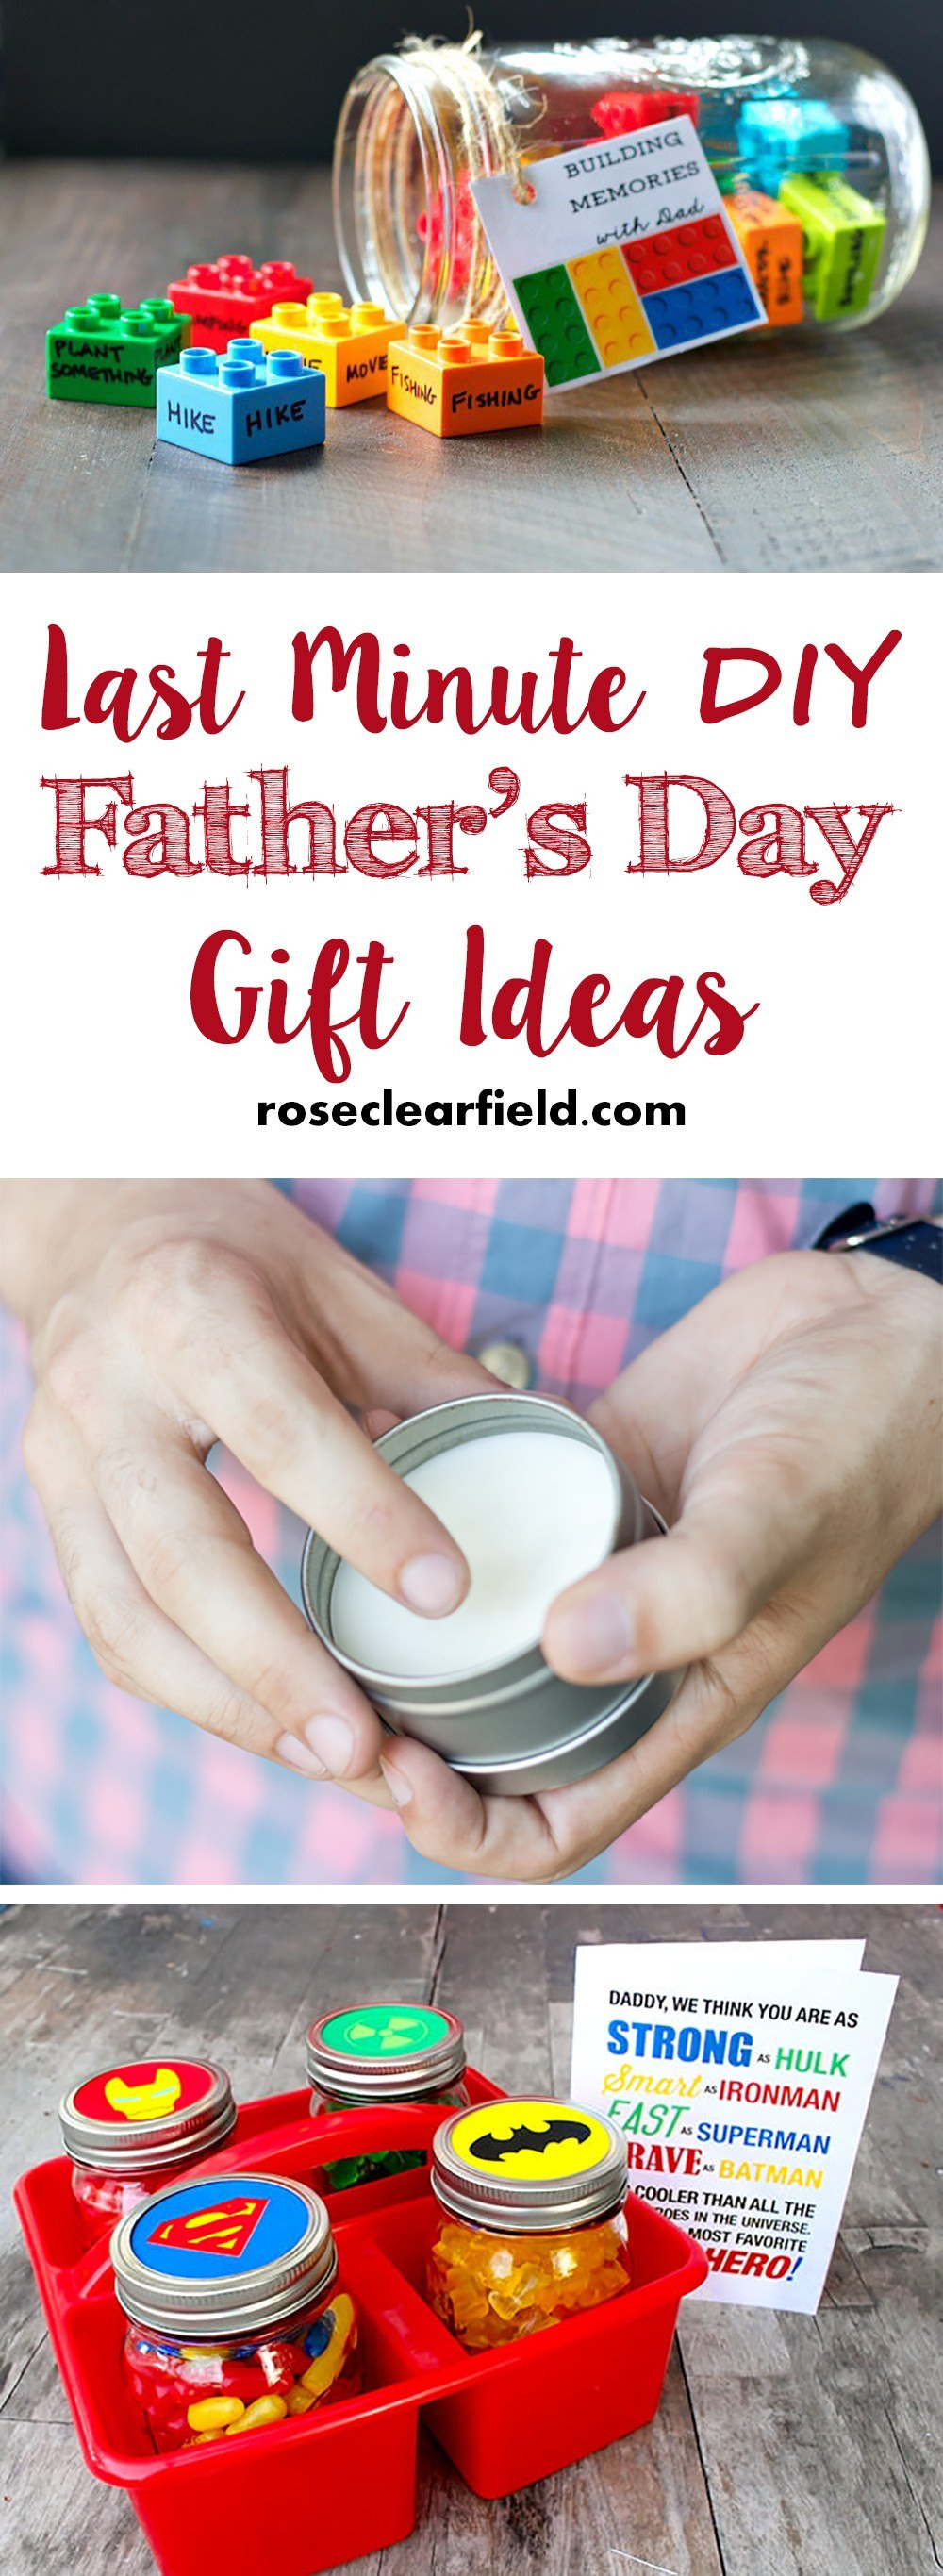 Last Minute Father'S Day Gift Ideas
 Last Minute DIY Father s Day Gift Ideas • Rose Clearfield